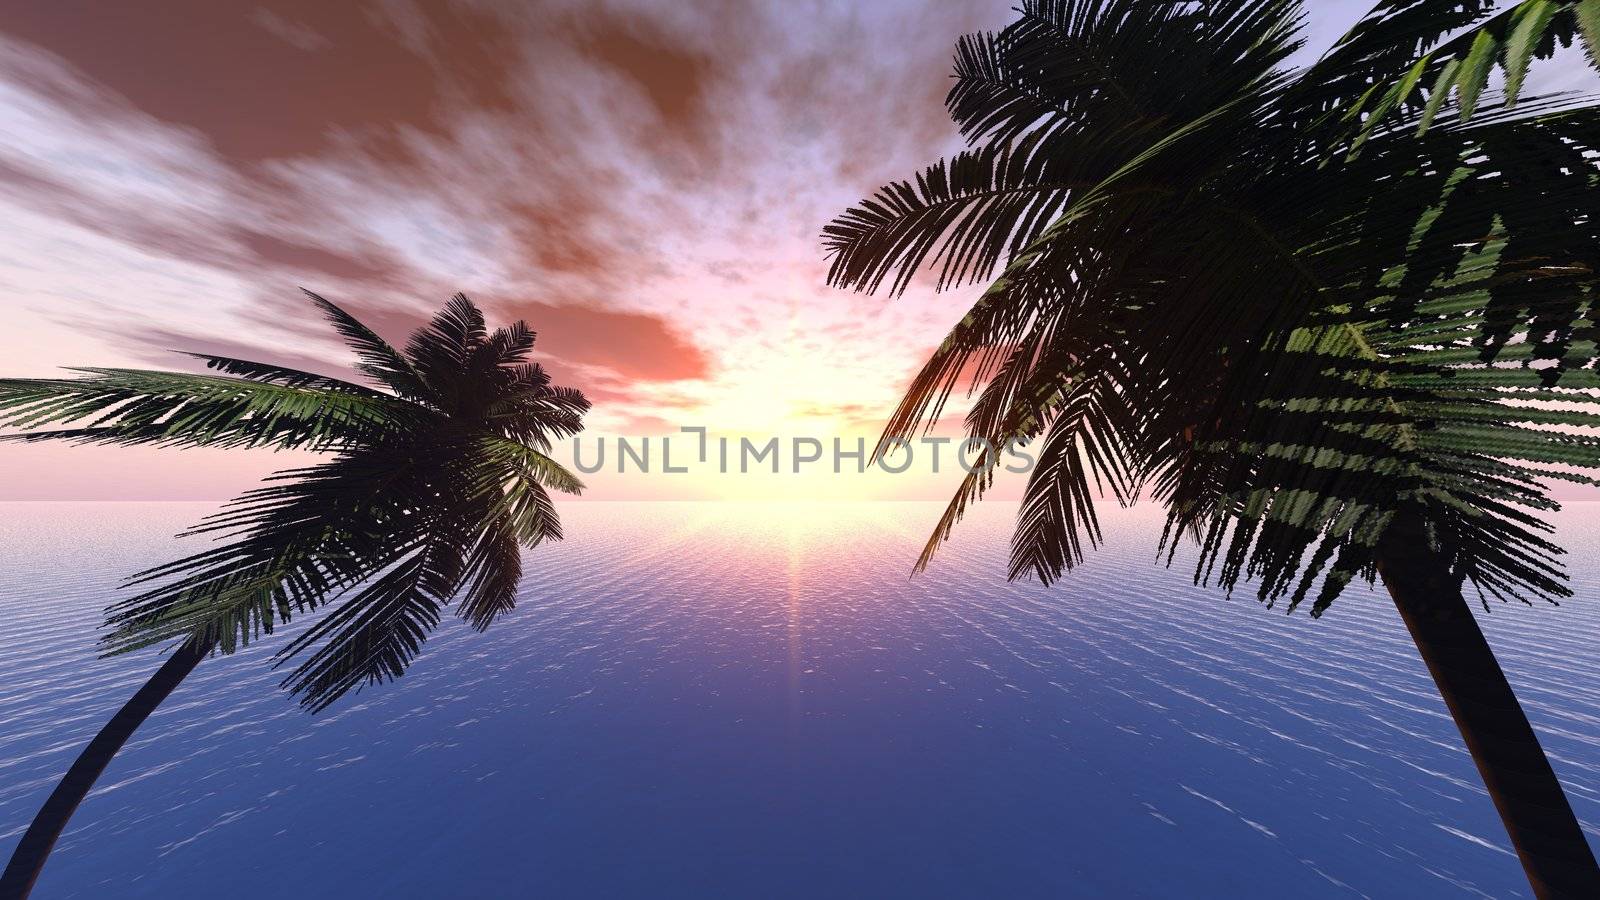 Sunset on a background of branches of palm trees and the effective sky. The yellow sun with very beautiful reflection at ocean. Objective 8mm